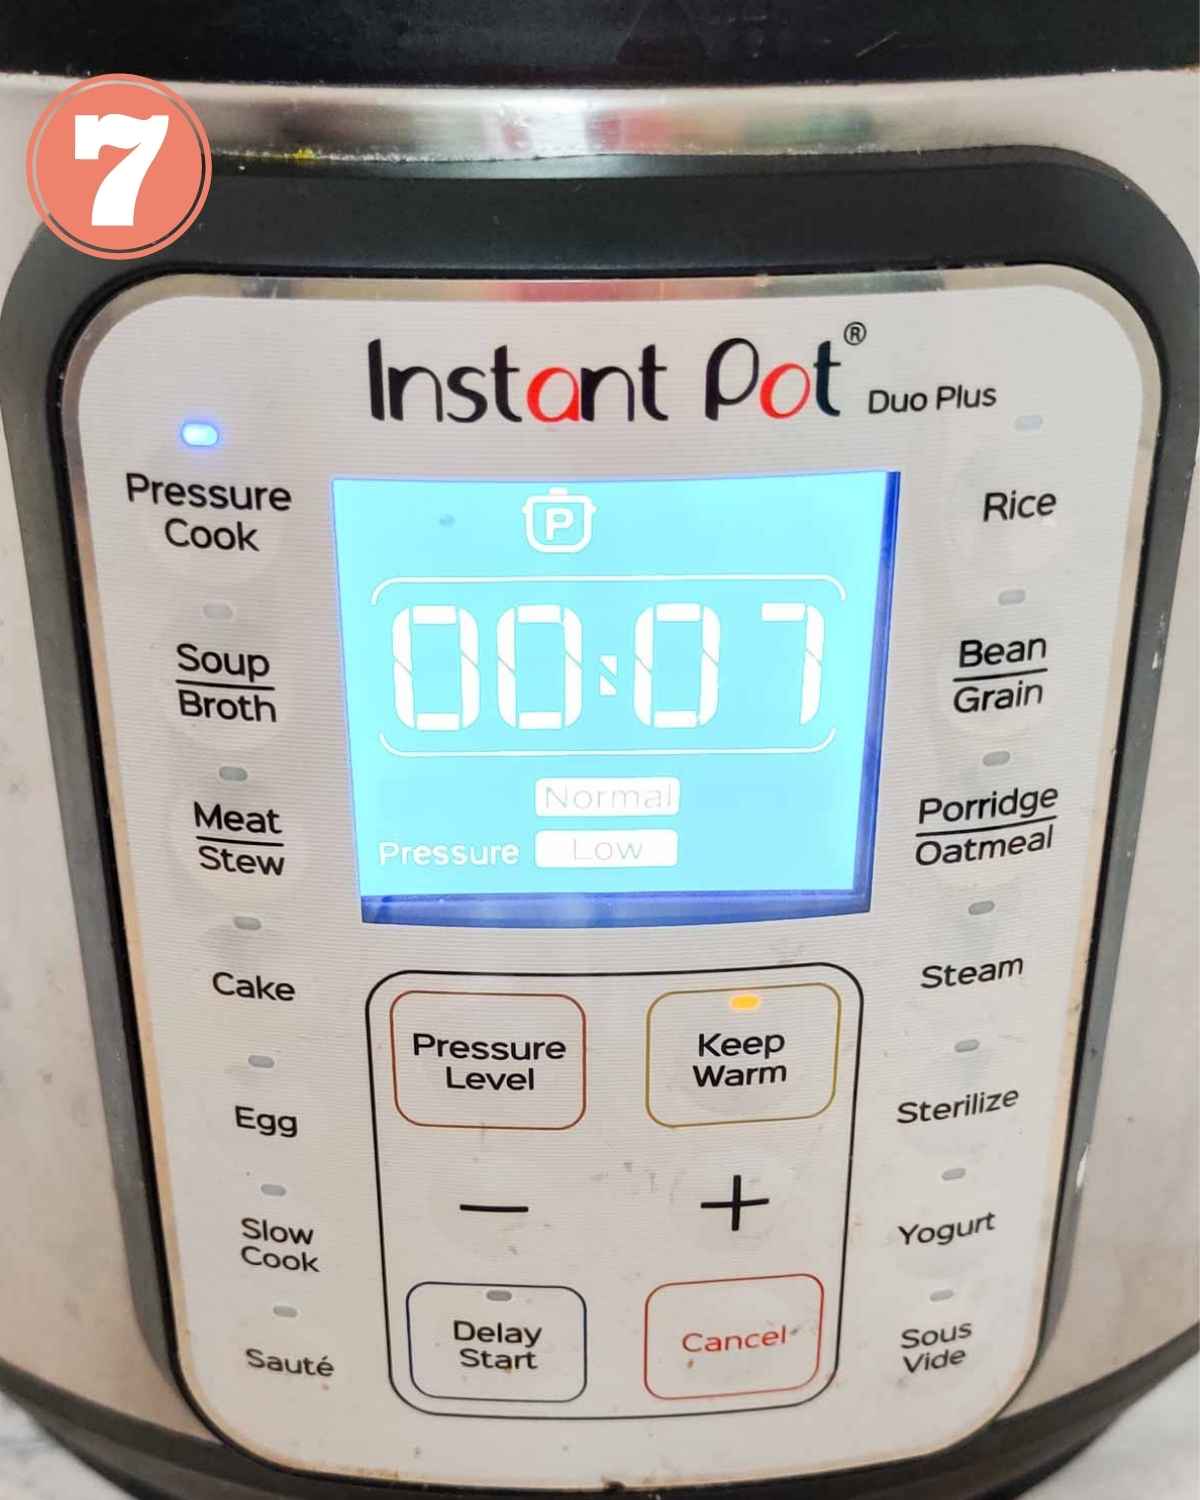 Instant Pot display showing a time setting of 7 minutes